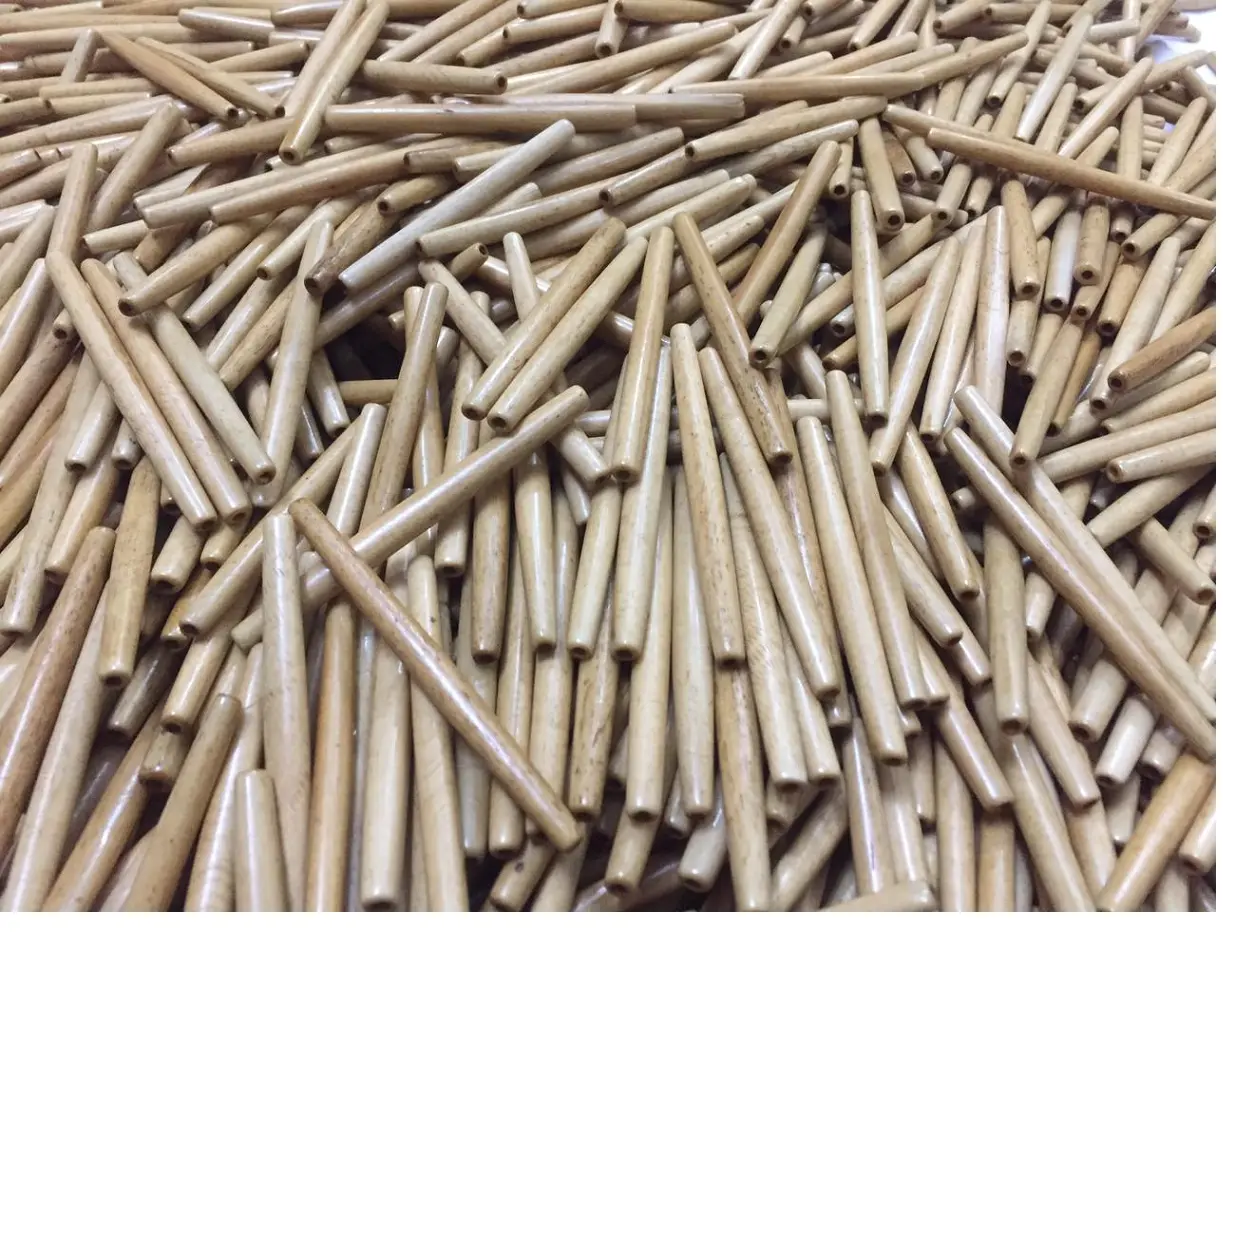 handcarved, handmade bone beads for jewelry designers, art and crafts, kids crafts, scrapbooking